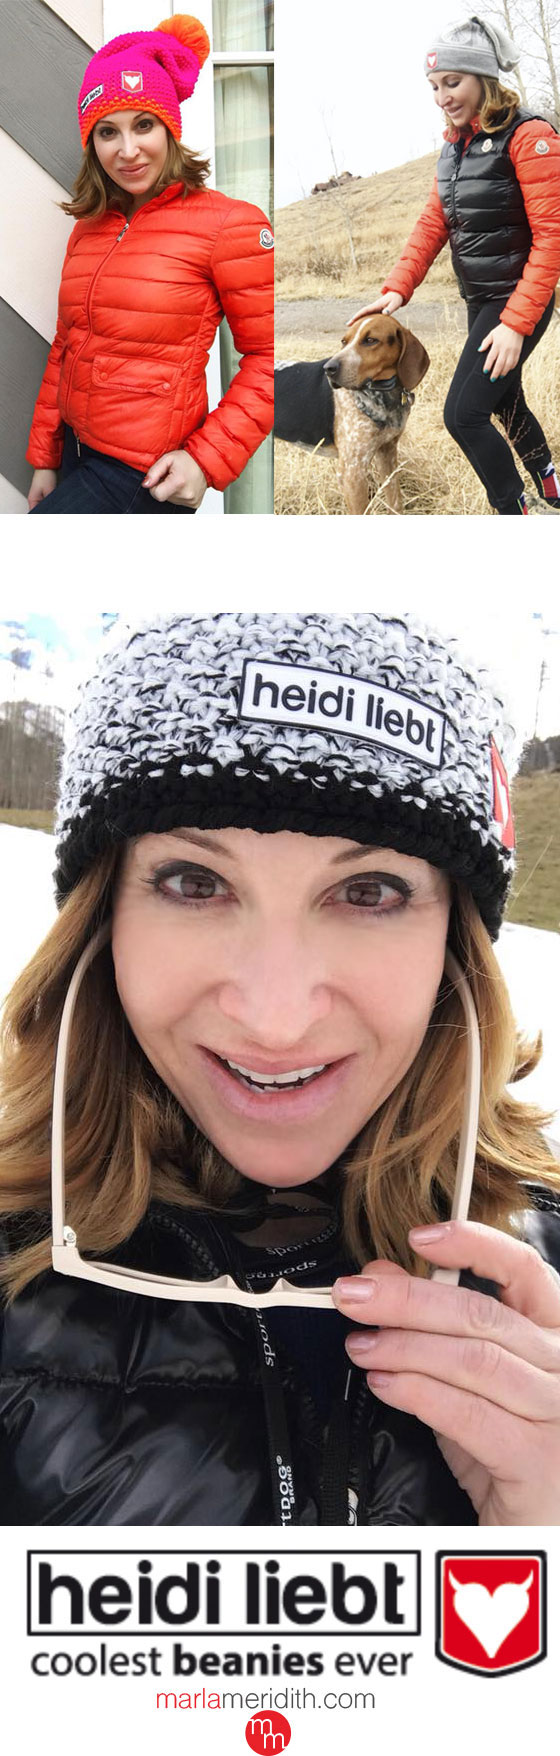 Heidi Liebt Beanies & a Holiday Special for YOU (check my website for the discount code) These are the perfect stocking stuffers and great holiday gifts for snow junkies! MarlaMeridith.com ( @marlameridith )